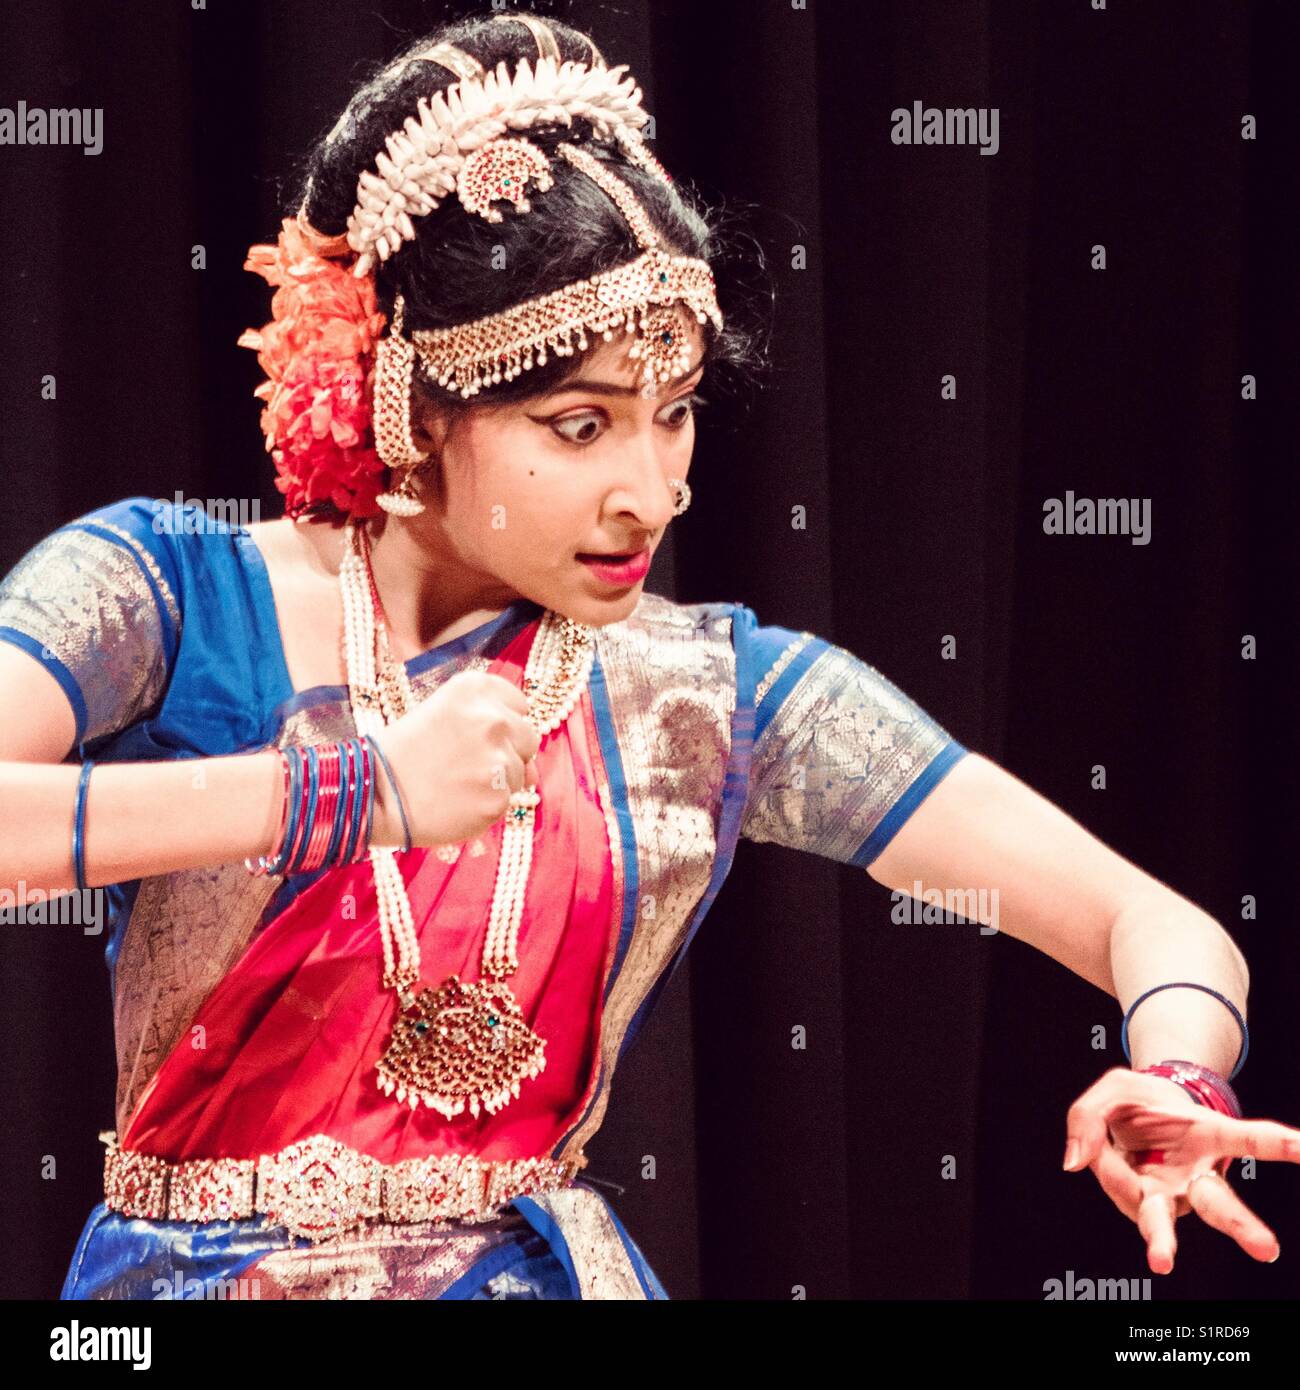 An Indian dancer performing an Indian traditional dance called kuchipudi Stock Photo